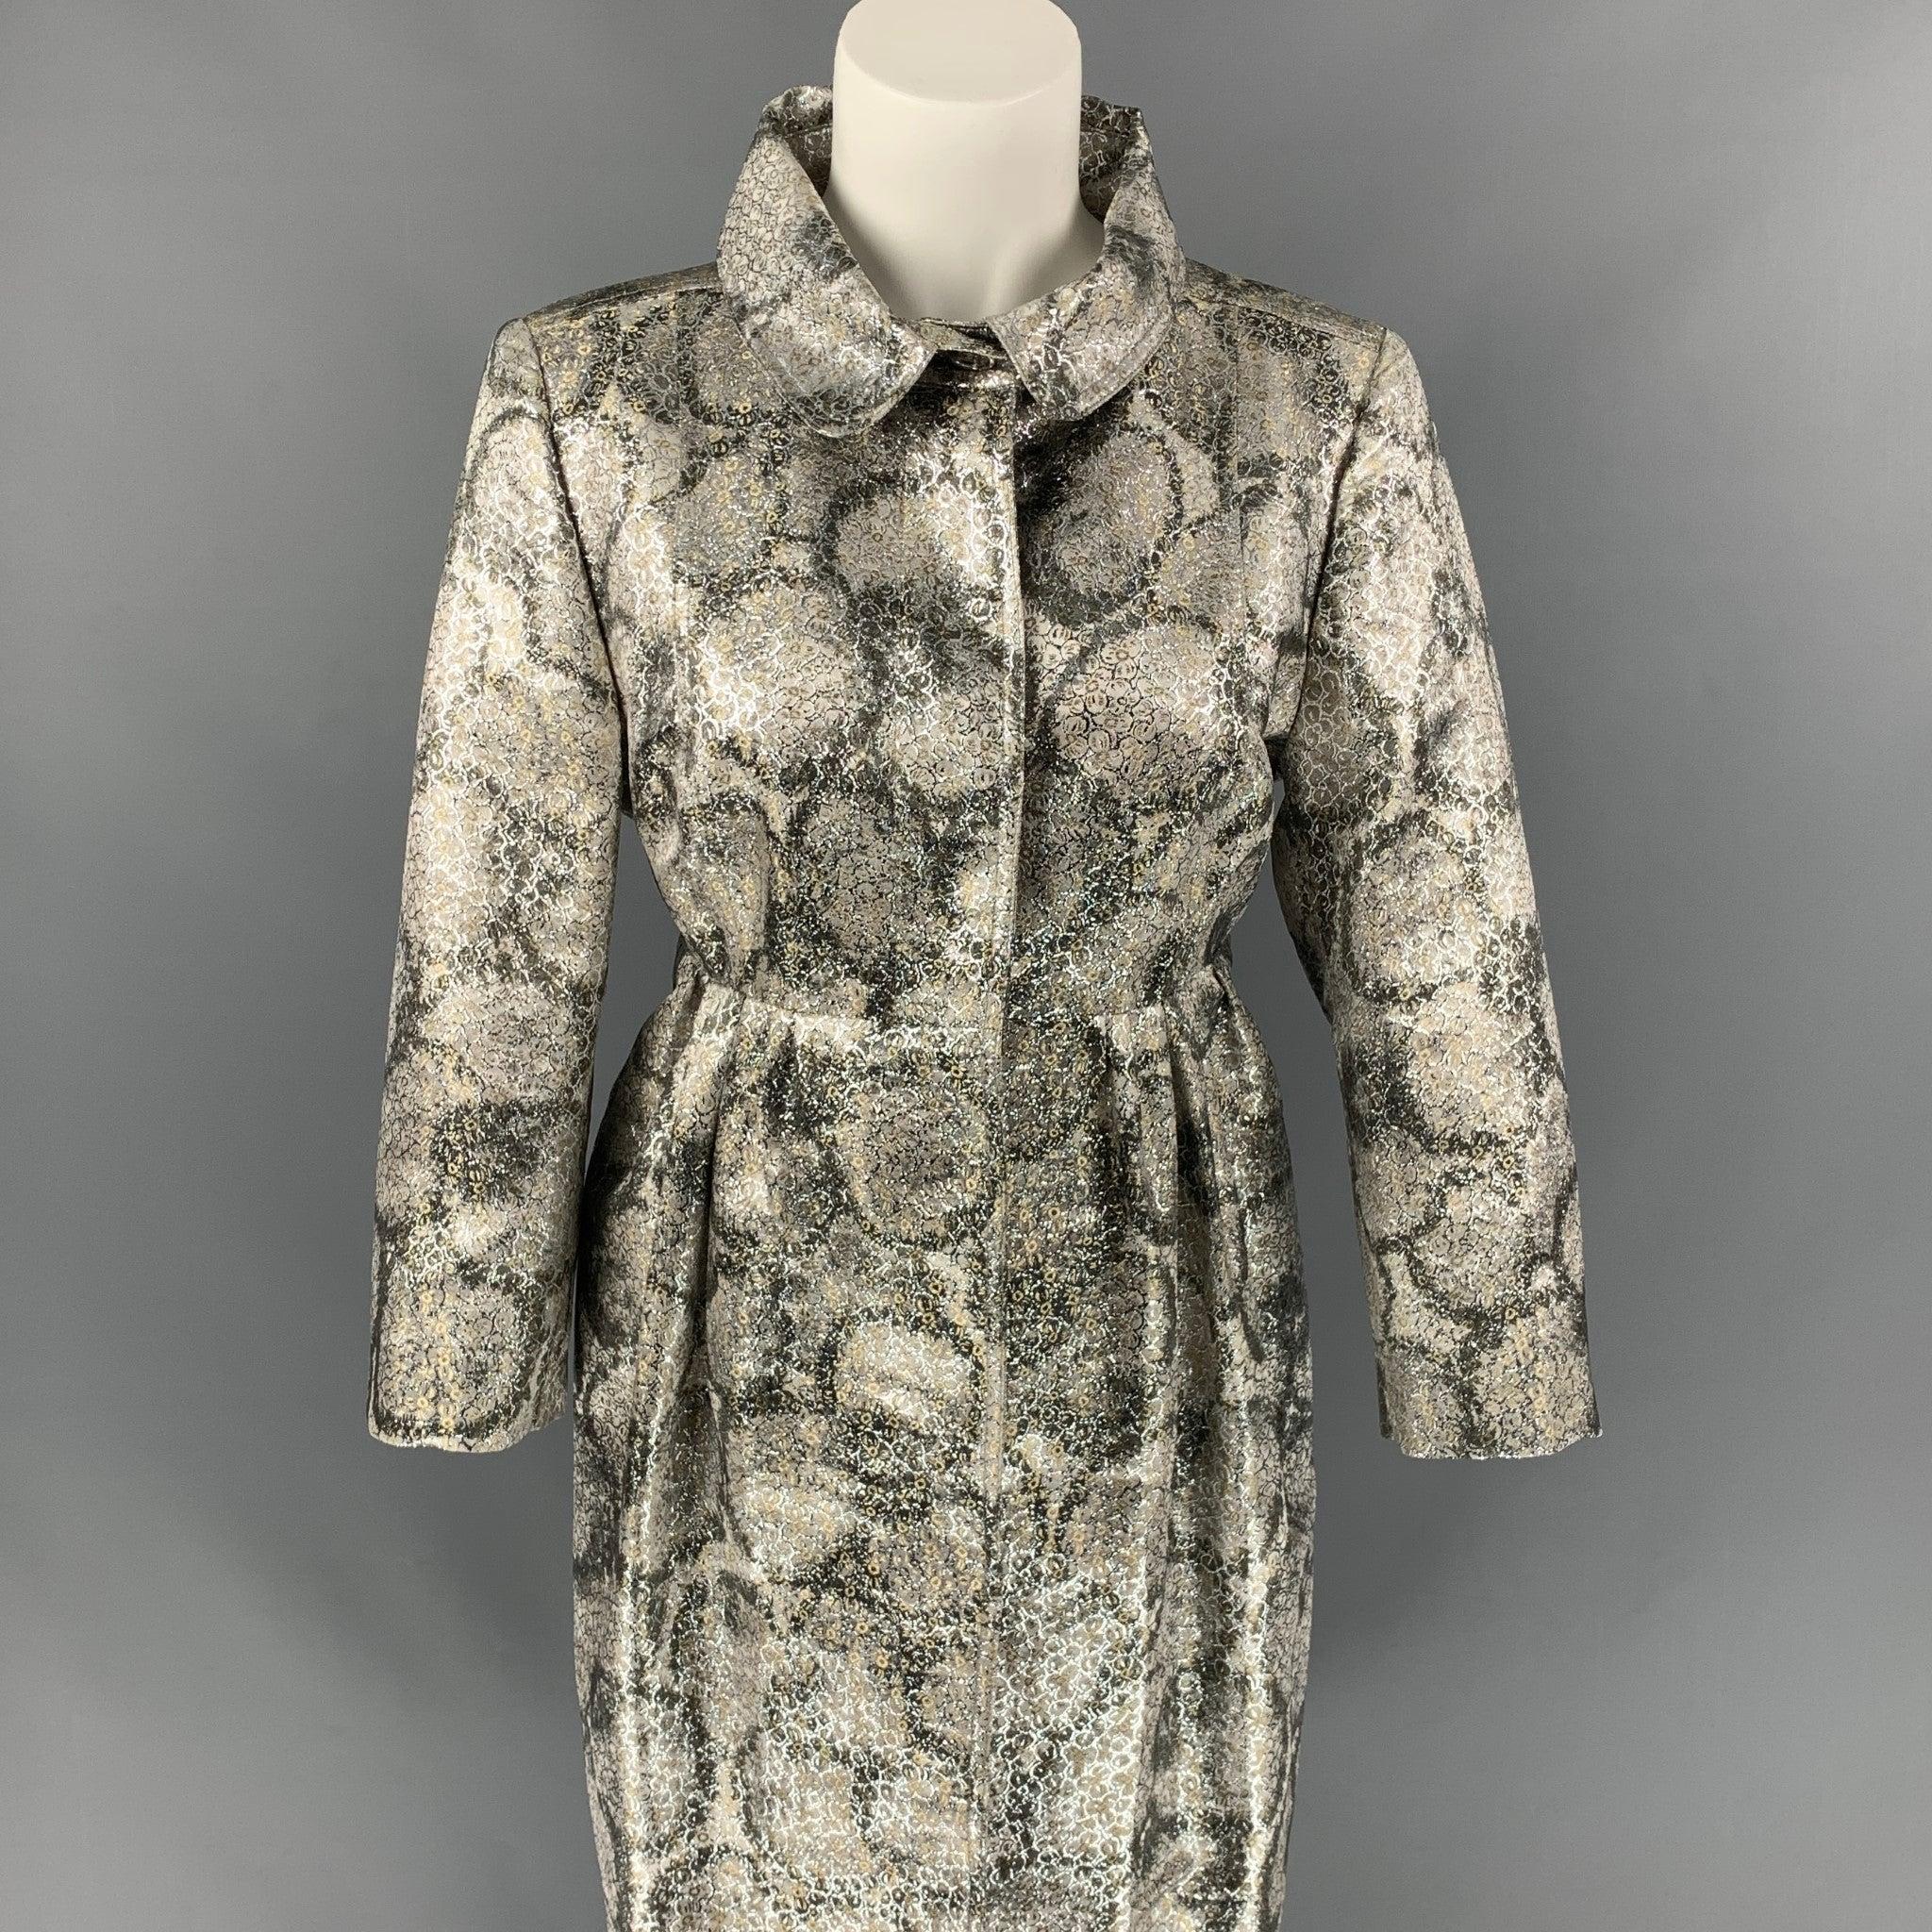 Early BURBERRY PRORSUM coat comes in a silver metallic jacquard silk blend with a full liner featuring an a-line silhouette, 3/4 sleeves, slit pockets, and a hidden snap button closure. Made in Italy.
Very Good
Pre-Owned Condition. 

Marked:  42